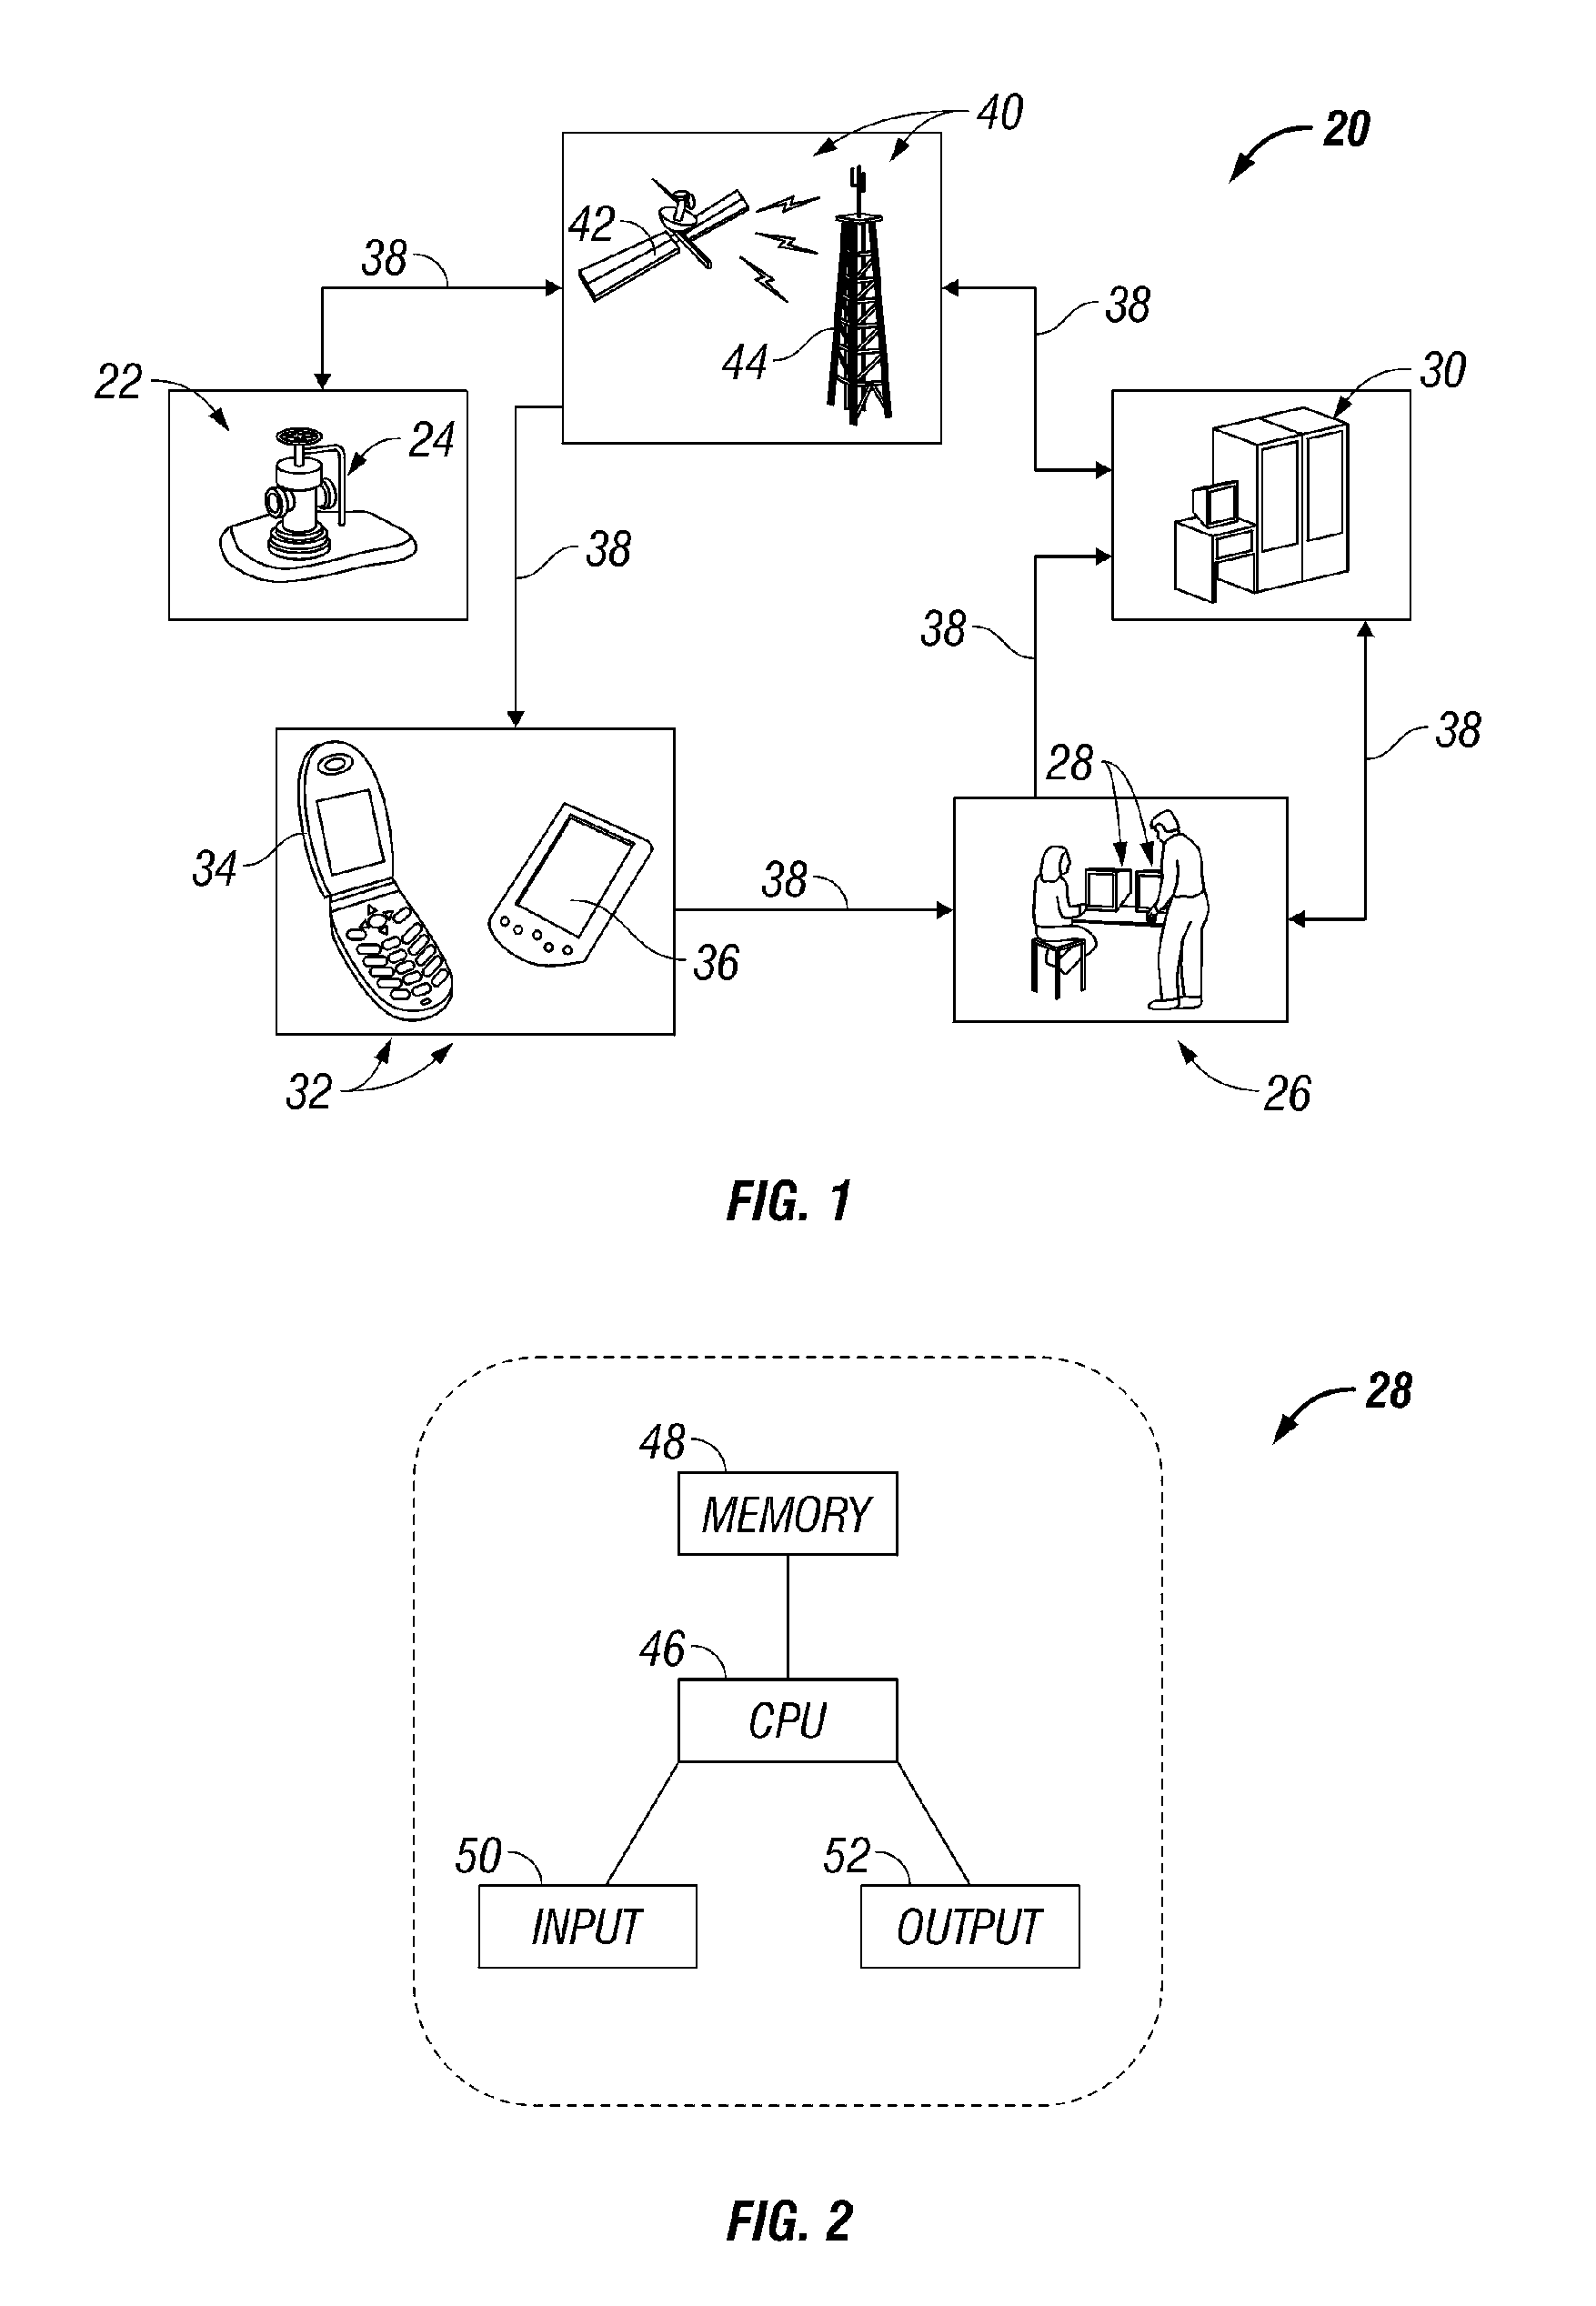 System and Method for Remote Real-Time Surveillance and Control of Pumped Wells